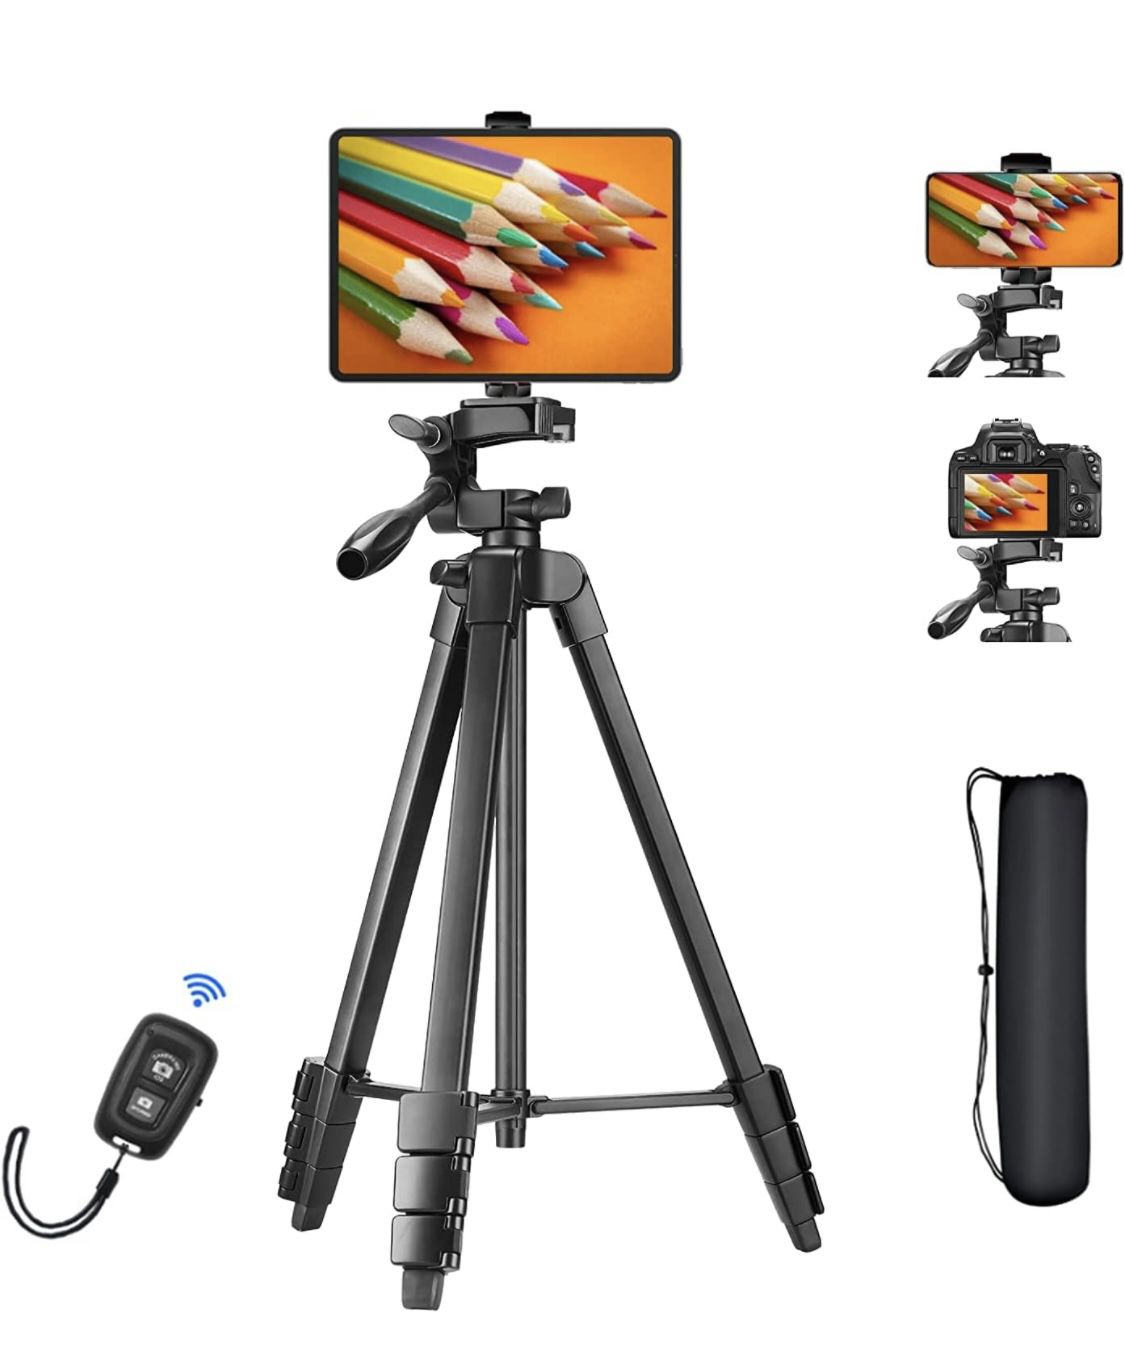 63" Tripod for iPad and iPhone, Camera Tripod Stand for Cell Phone/Tablet 4"-12.9",Aluminum Portable Travel Tripod Mount with Remote & Carry 